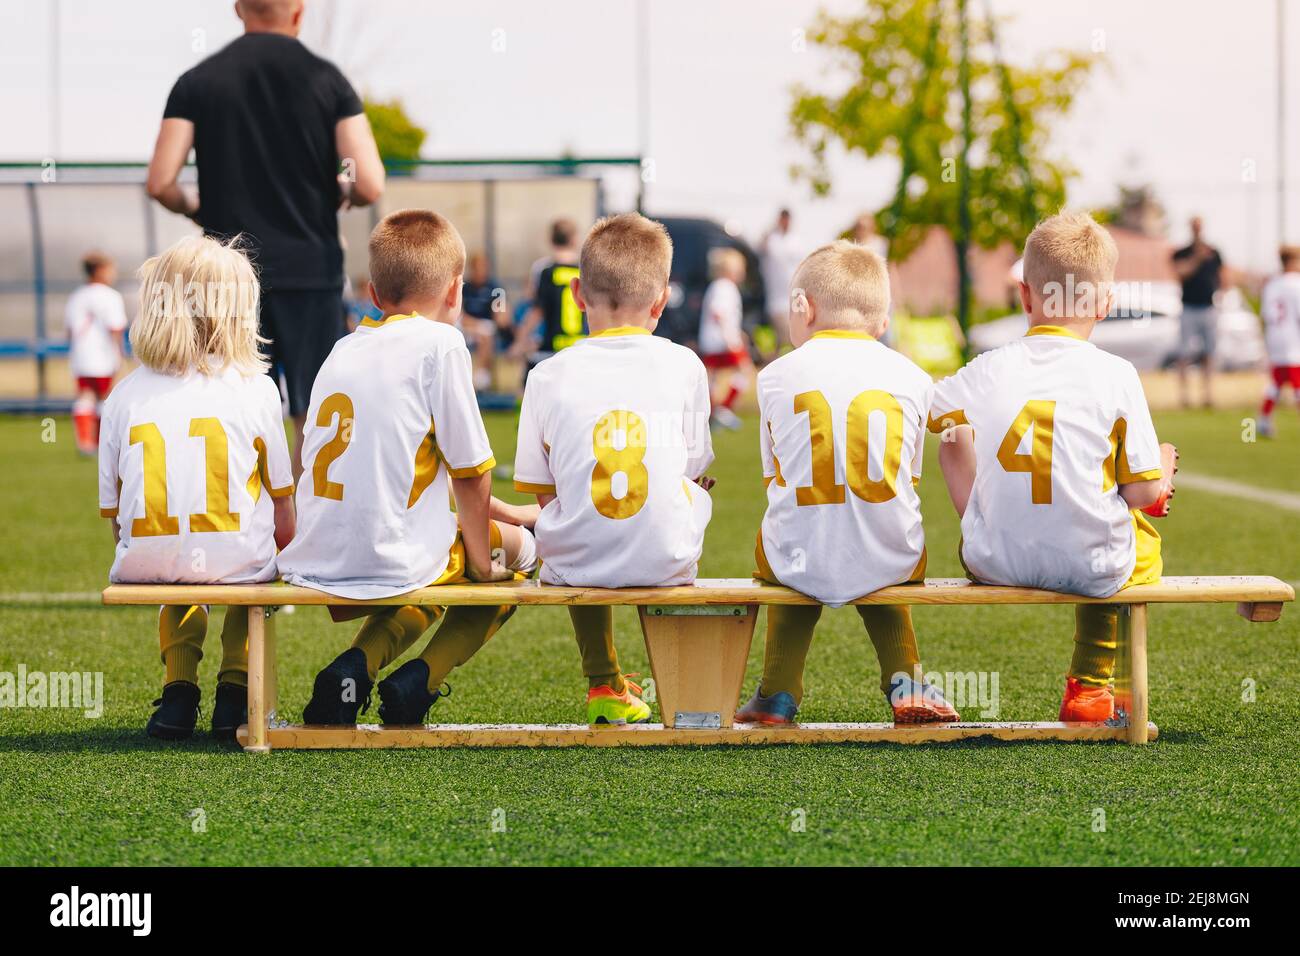 Group of Children in Soccer Jerseys with Golden Player Numbers. Football Team on Bench. Group of Young Boys with School Sports Coach Trainer. Youth Fo Stock Photo